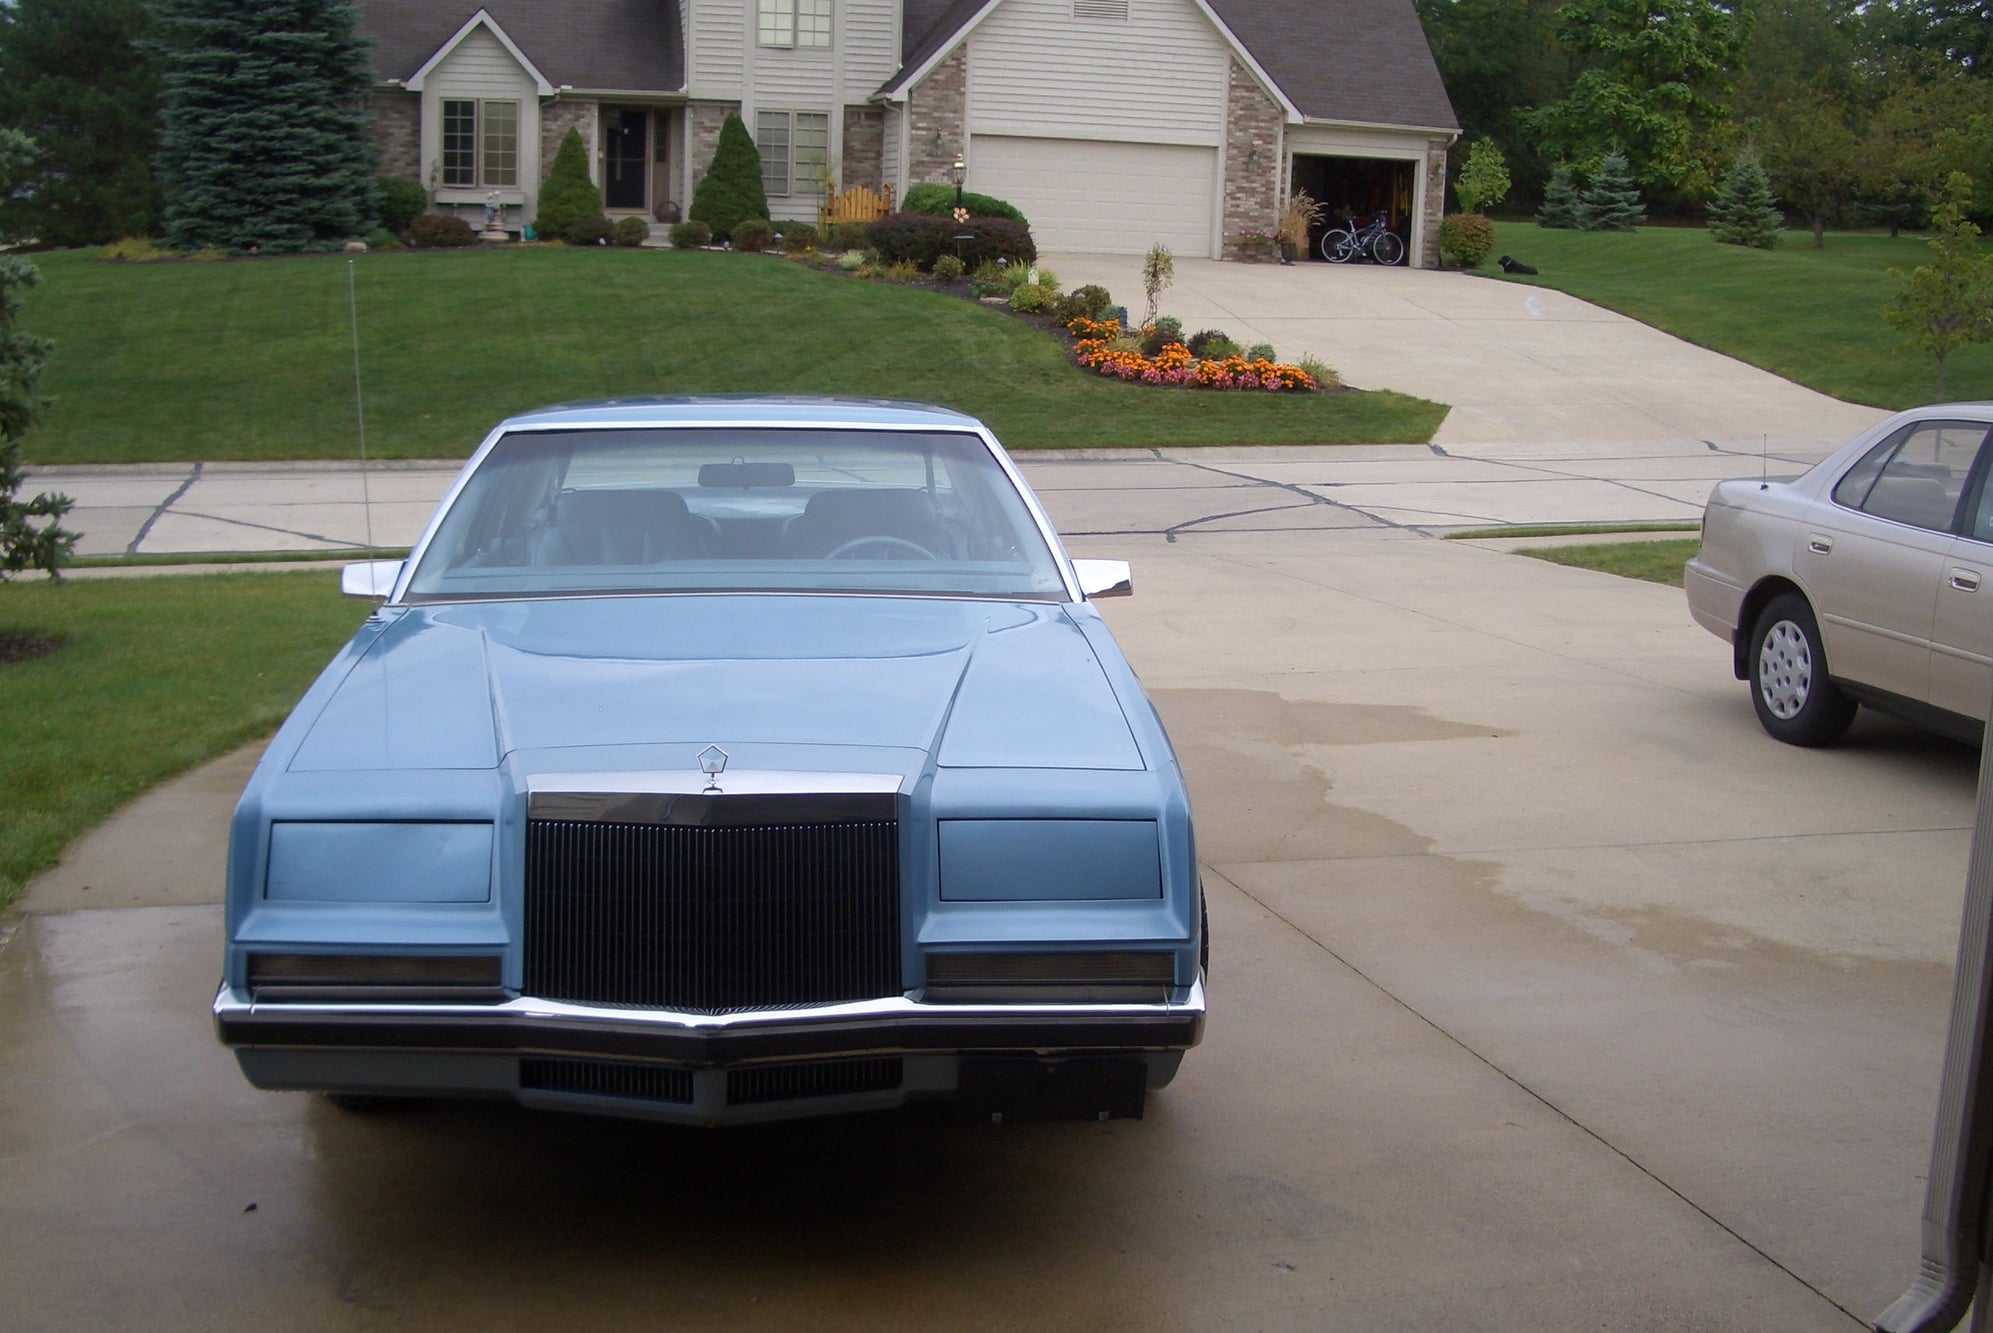 1982 Chrysler Imperial - 1982 Frank Sinatra Edition Imperial - Used - VIN 2A3By62J3CR153247 - 8 cyl - 2WD - Automatic - Blue - Fort Wayne, IN 46804, United States